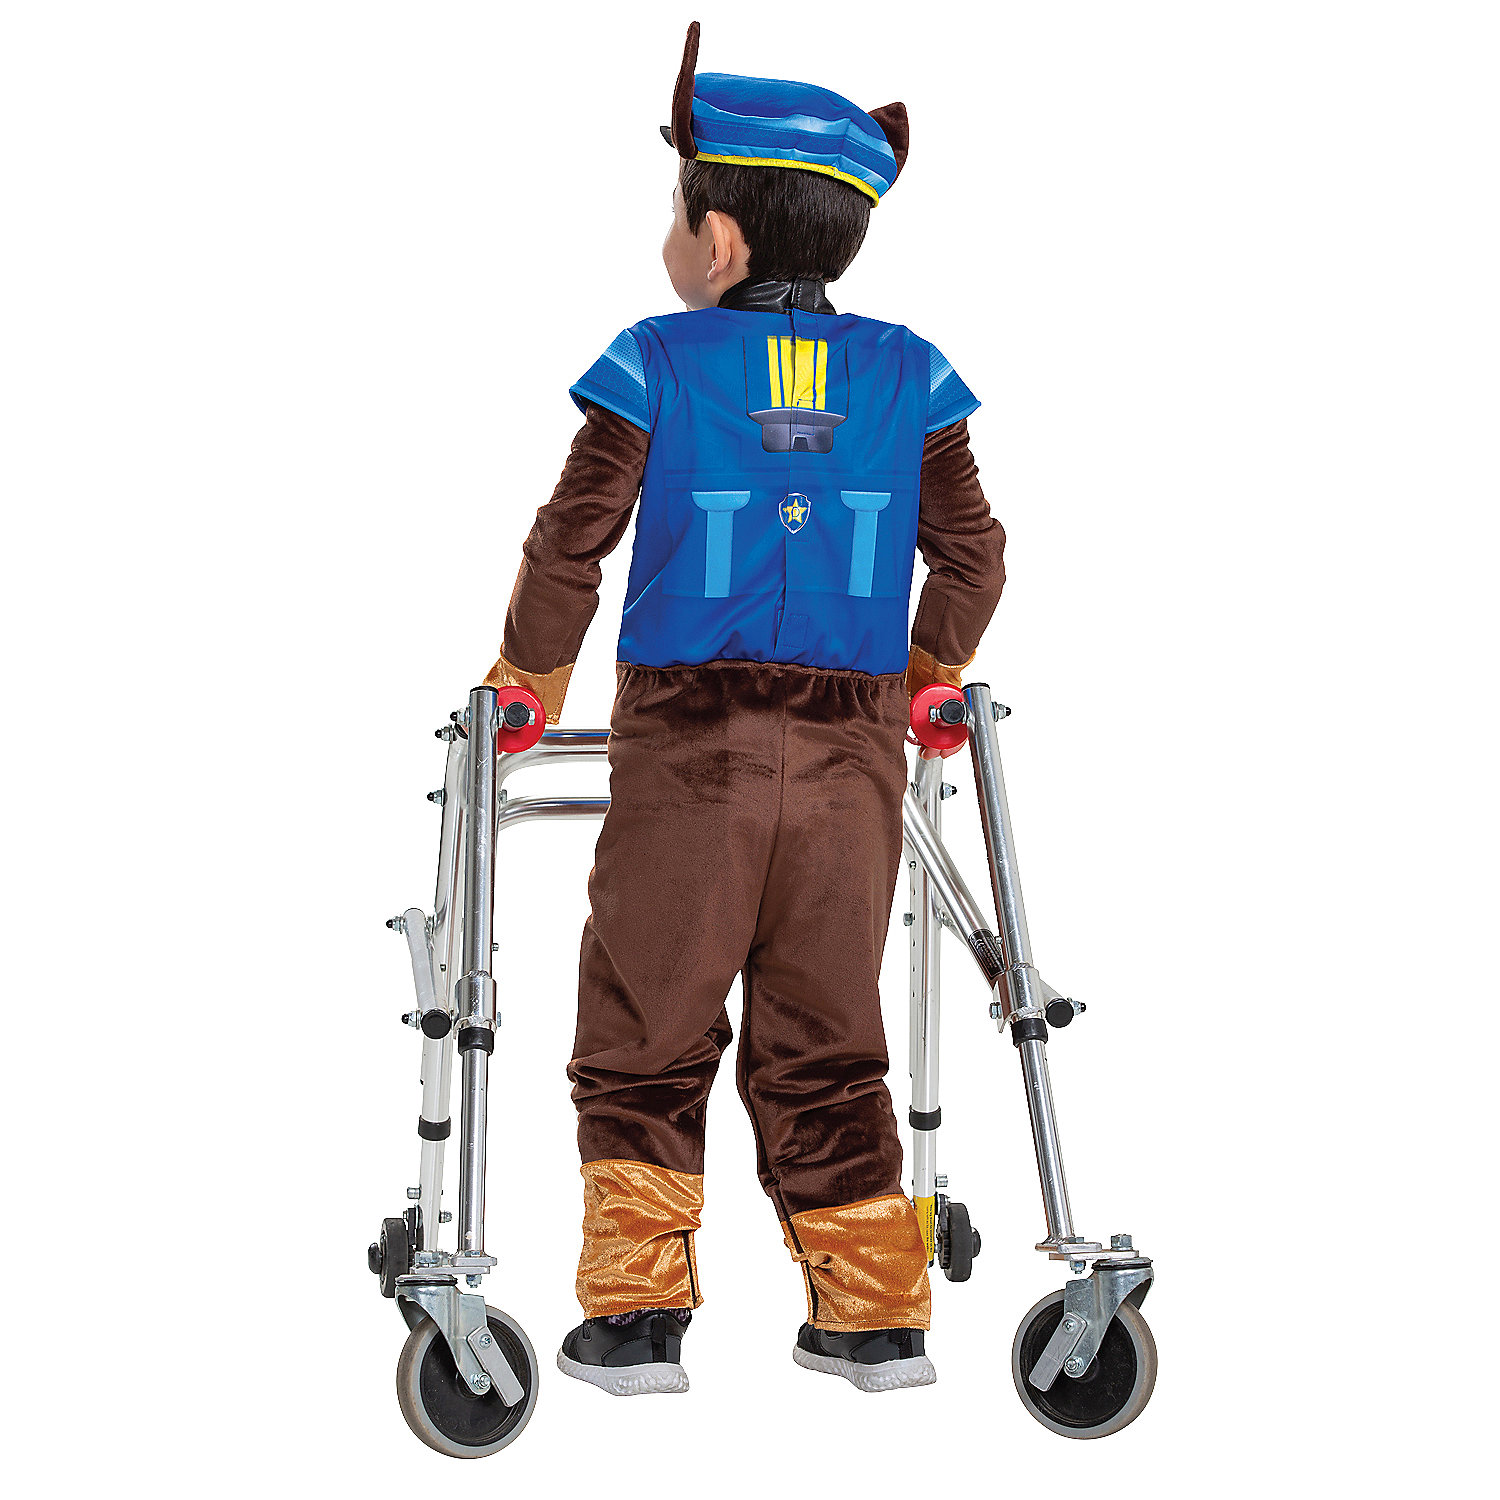 Disguise Toddler Boys' PAW Patrol Chase Adaptive Costume - Size 3T-4T - image 2 of 2